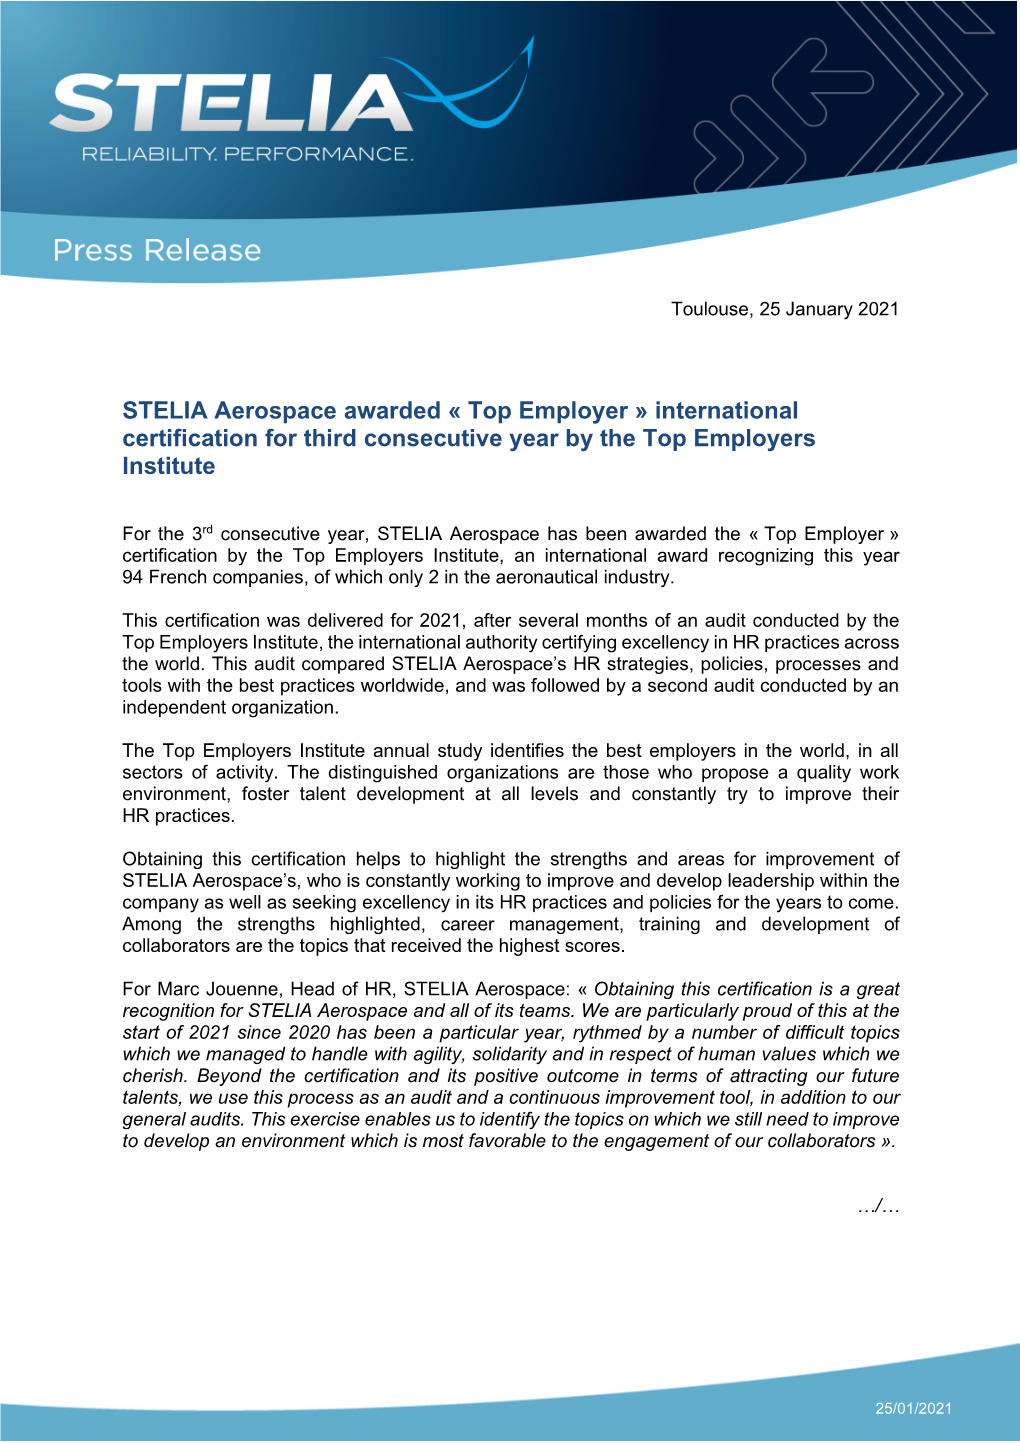 STELIA Aerospace Awarded « Top Employer » International Certification for Third Consecutive Year by the Top Employers Institute